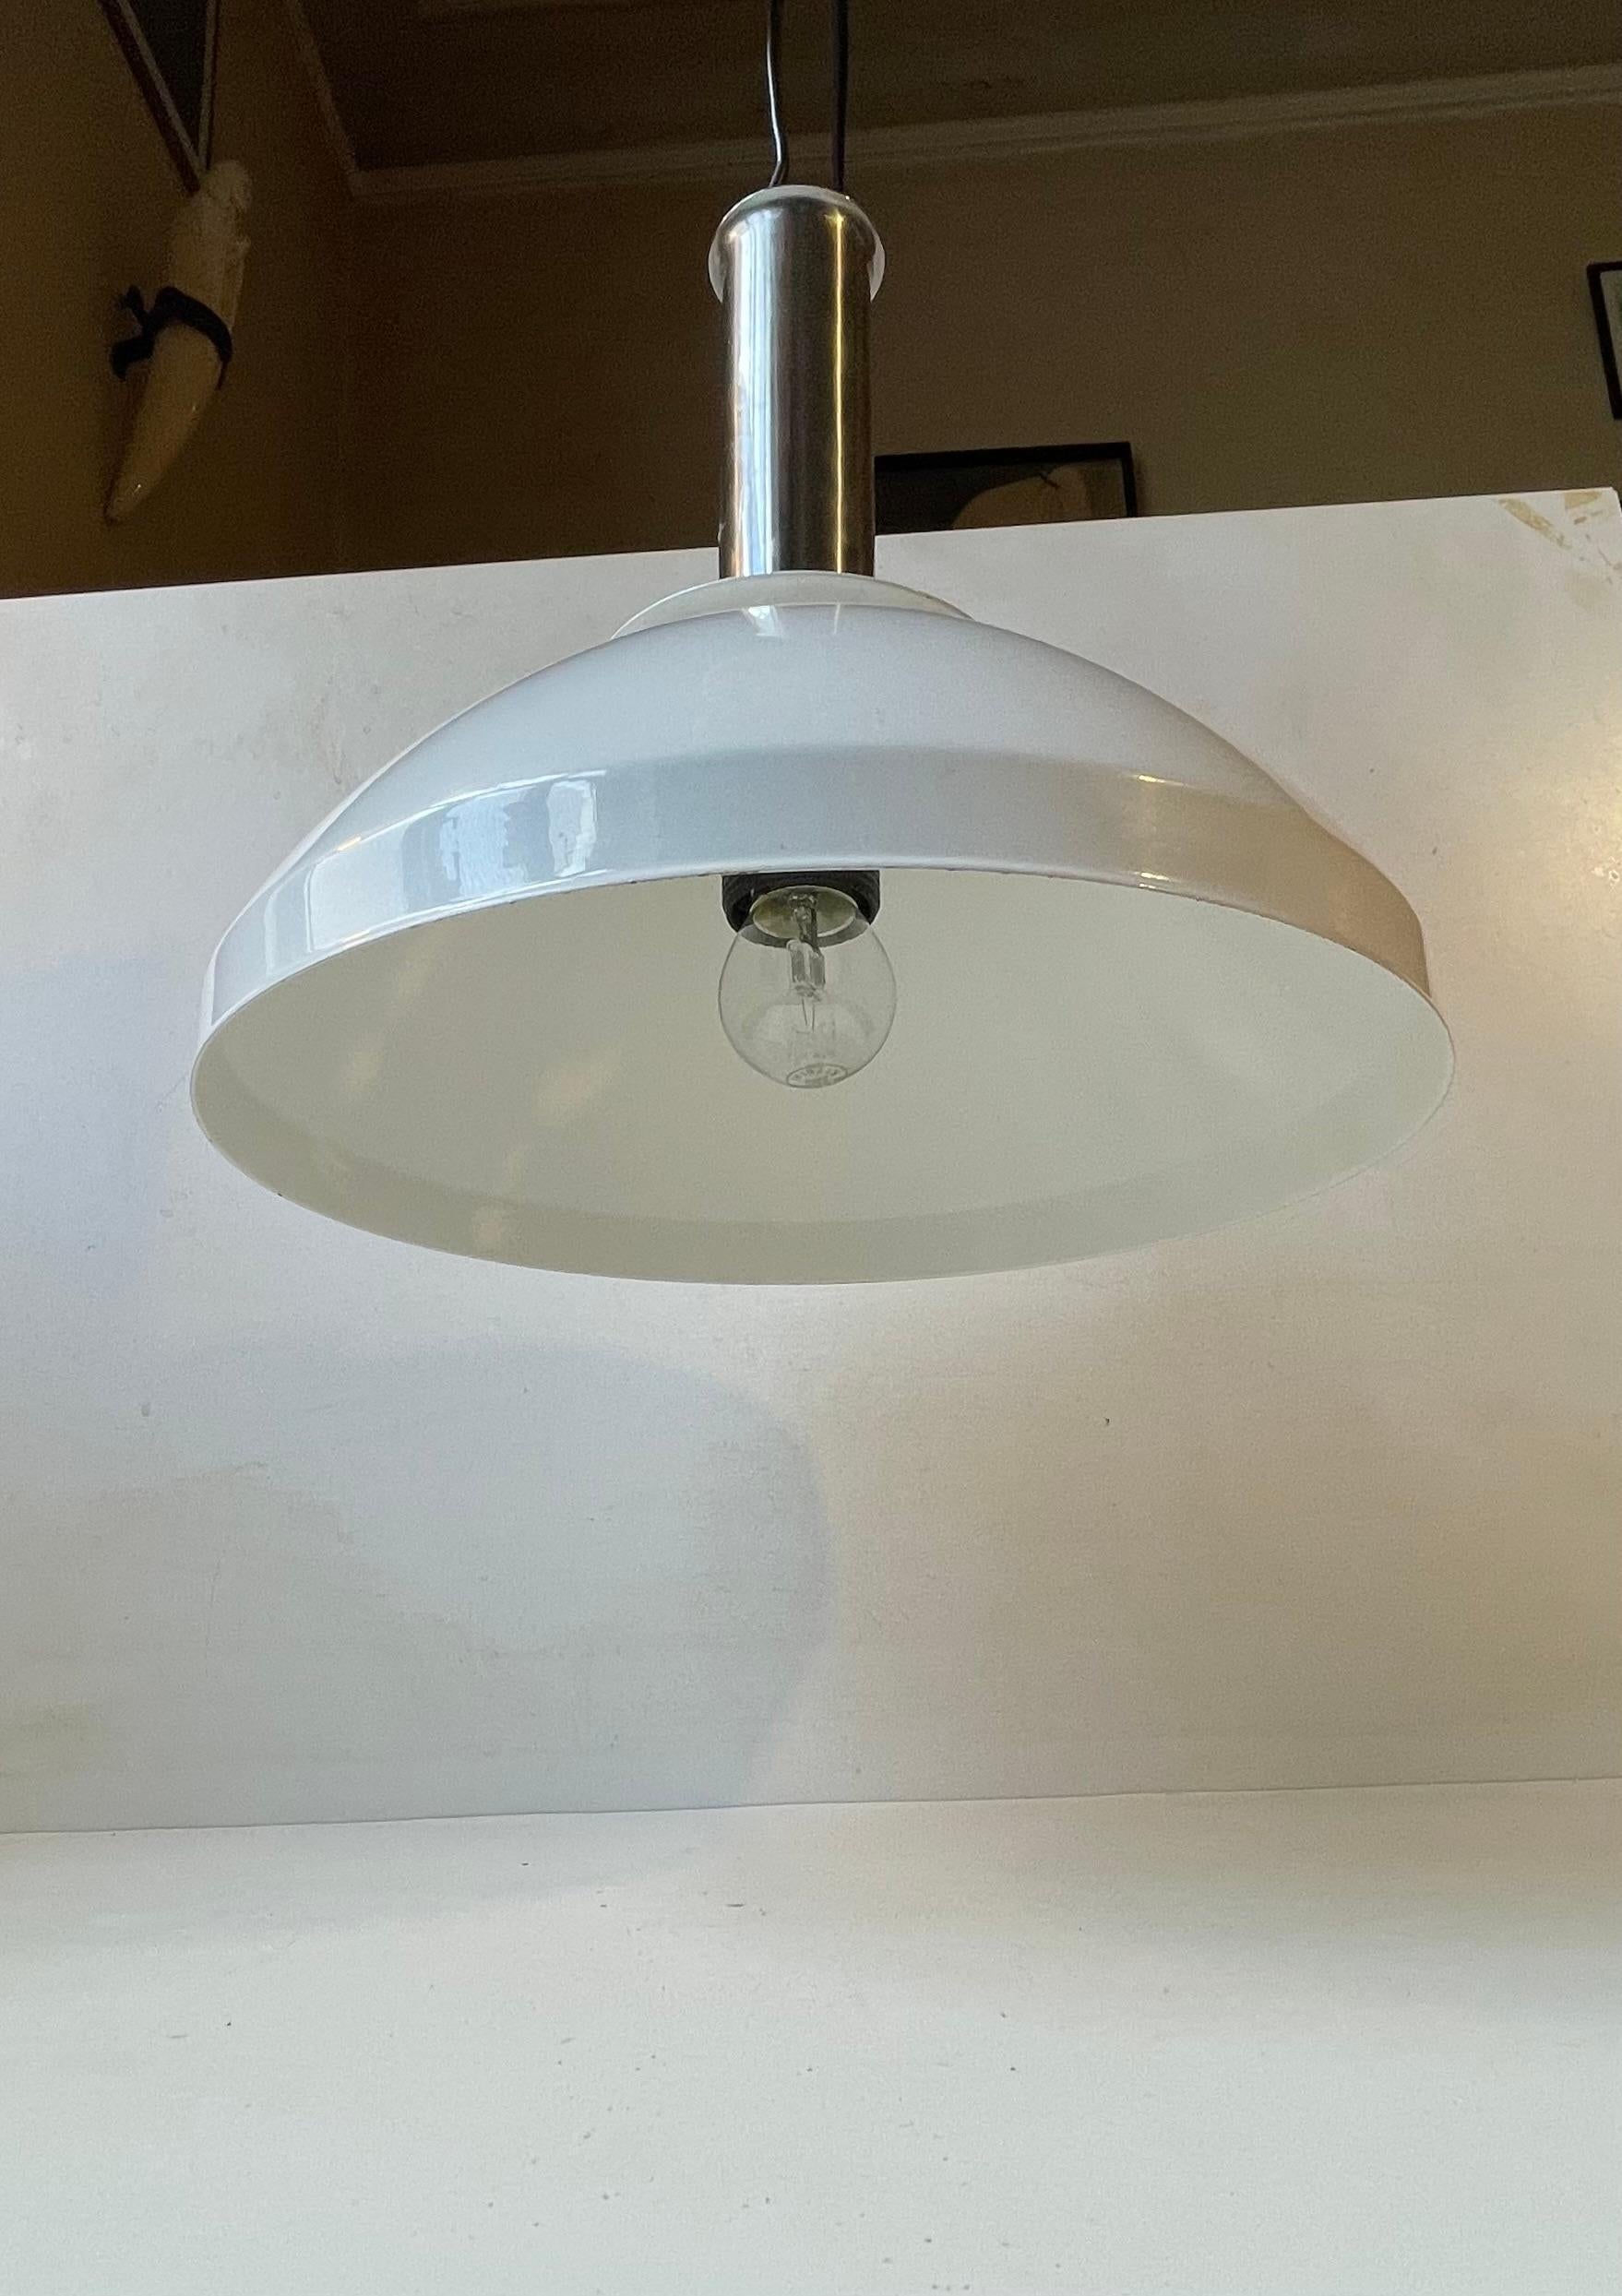 Late 20th Century Italian Industrial Ceiling Lamp in White Enamel and Chrome Plating, 1970s For Sale